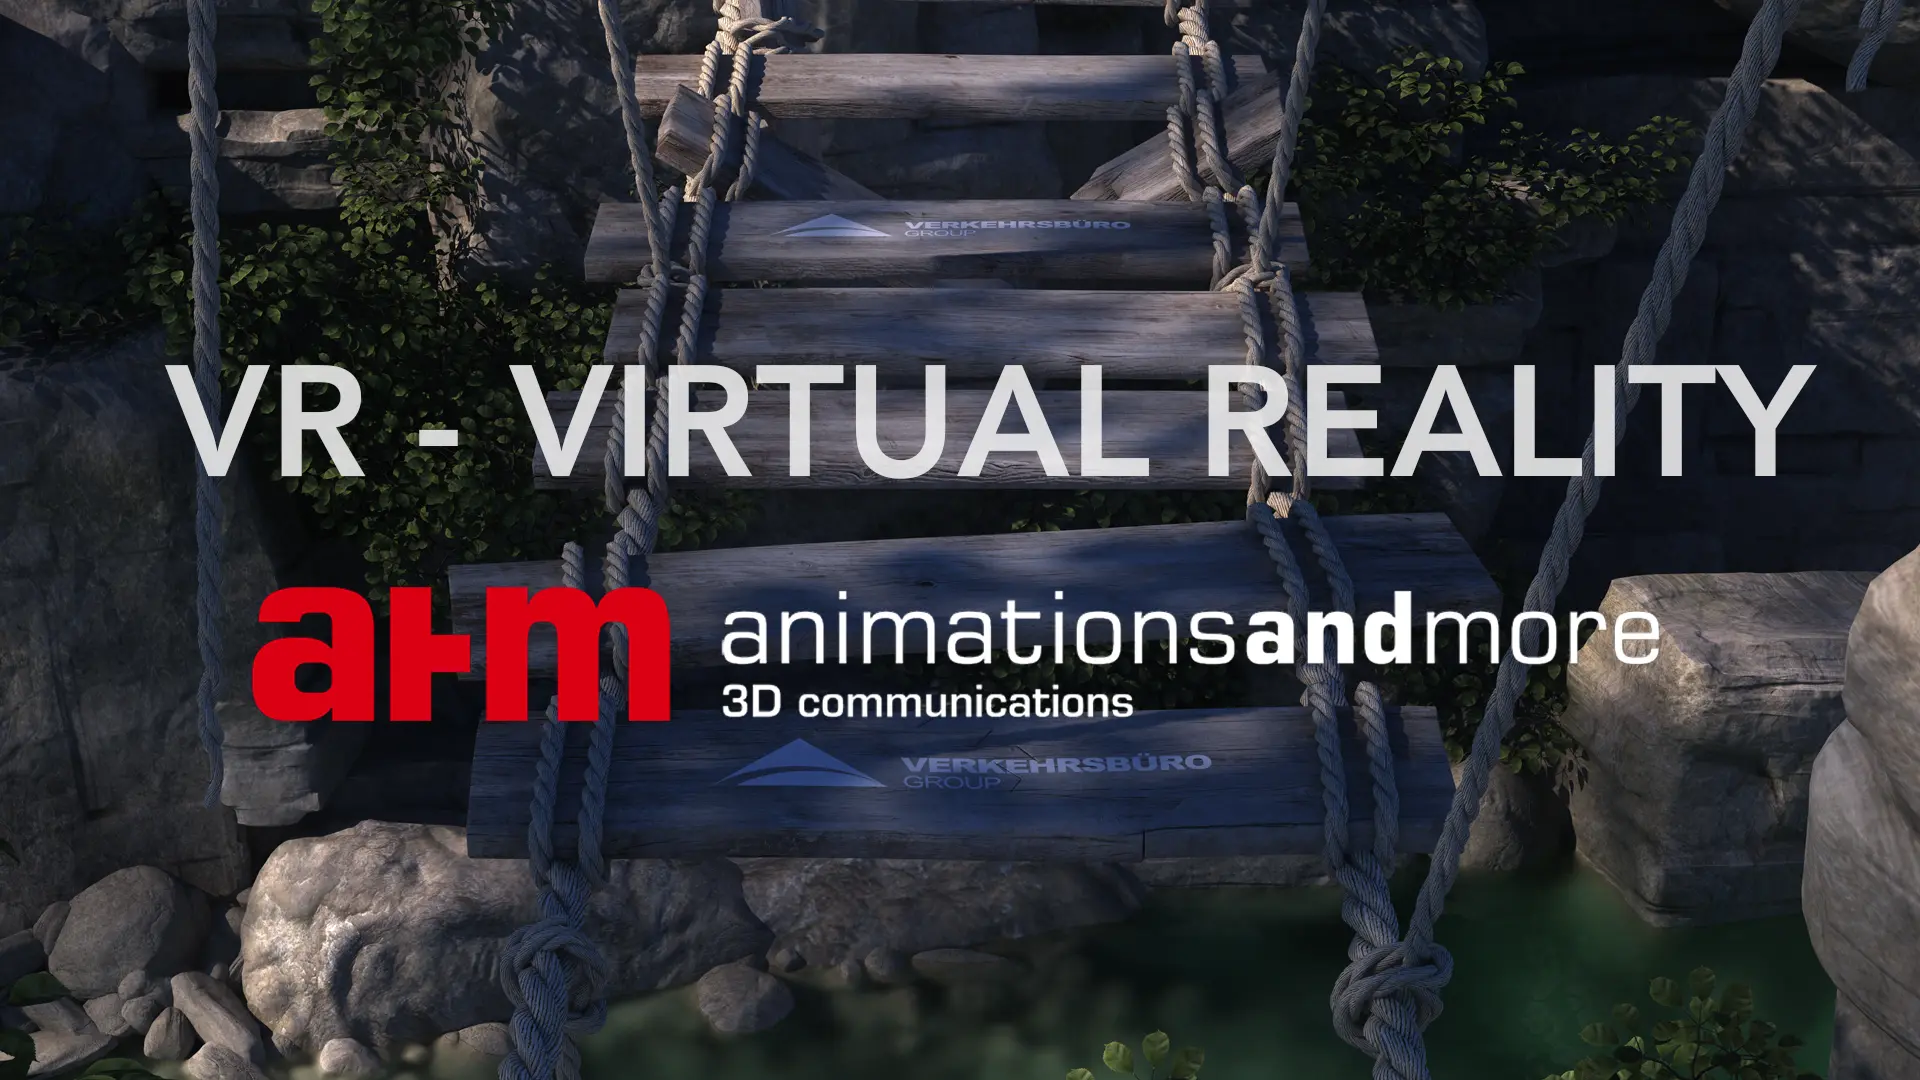 VR for Animation And More